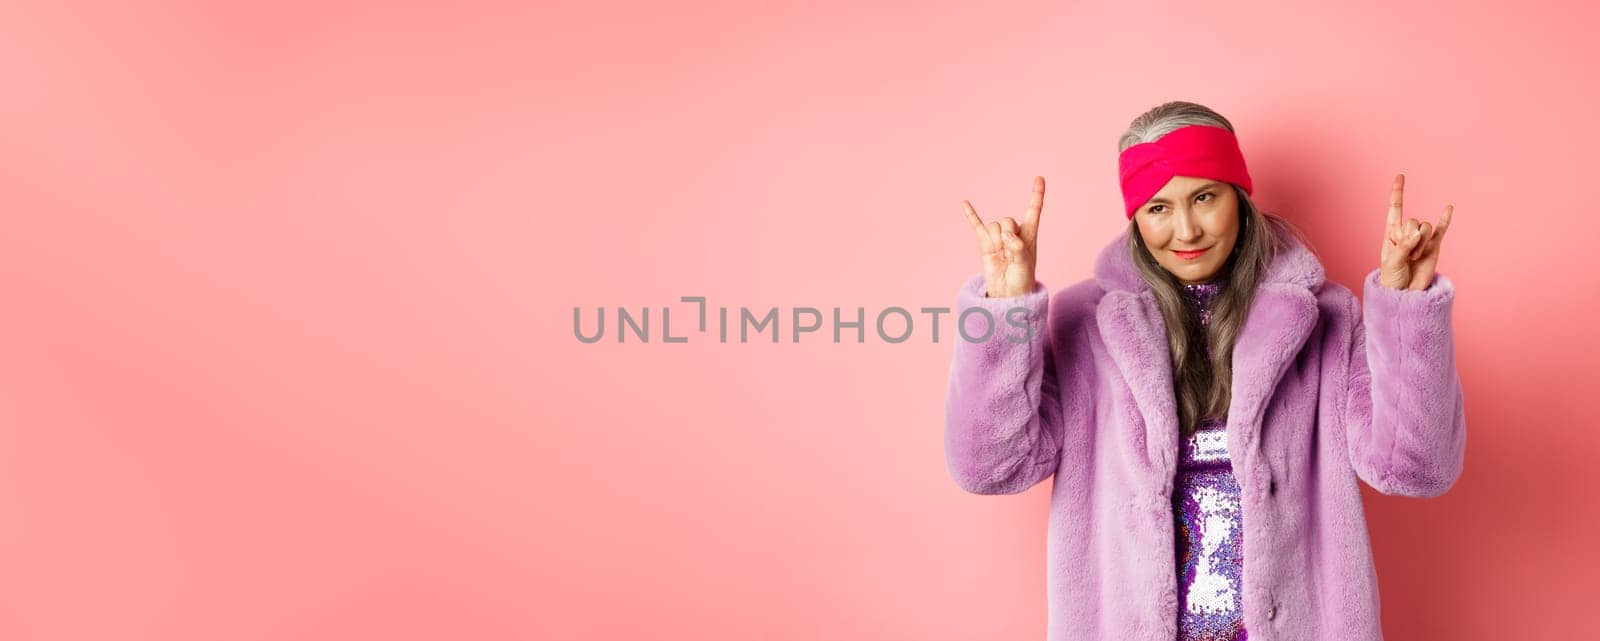 Funny and cool asian senior woman showing rock n roll gesture, looking sassy, standing over pink background.